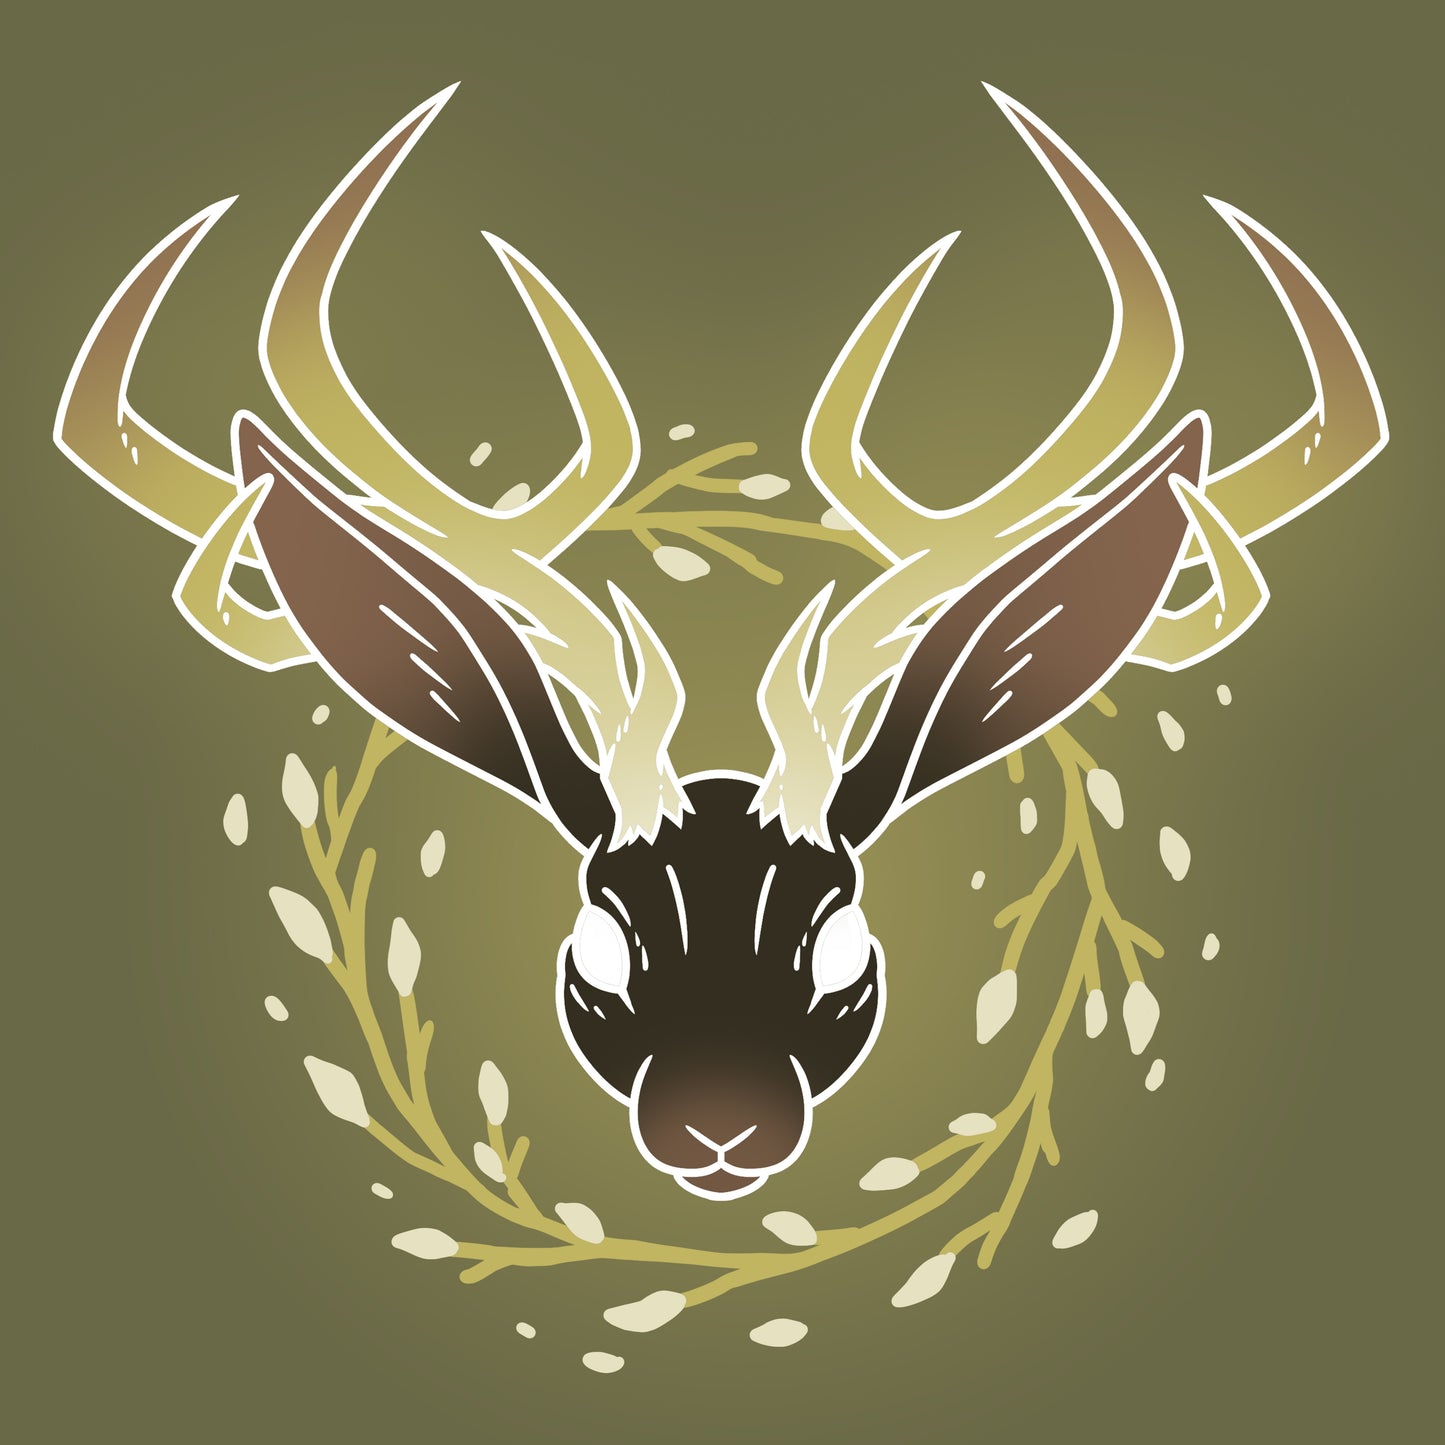 A Flourishing Jackalope with antlers adorned in a wreath against a green background, inspired by TeeTurtle designs.